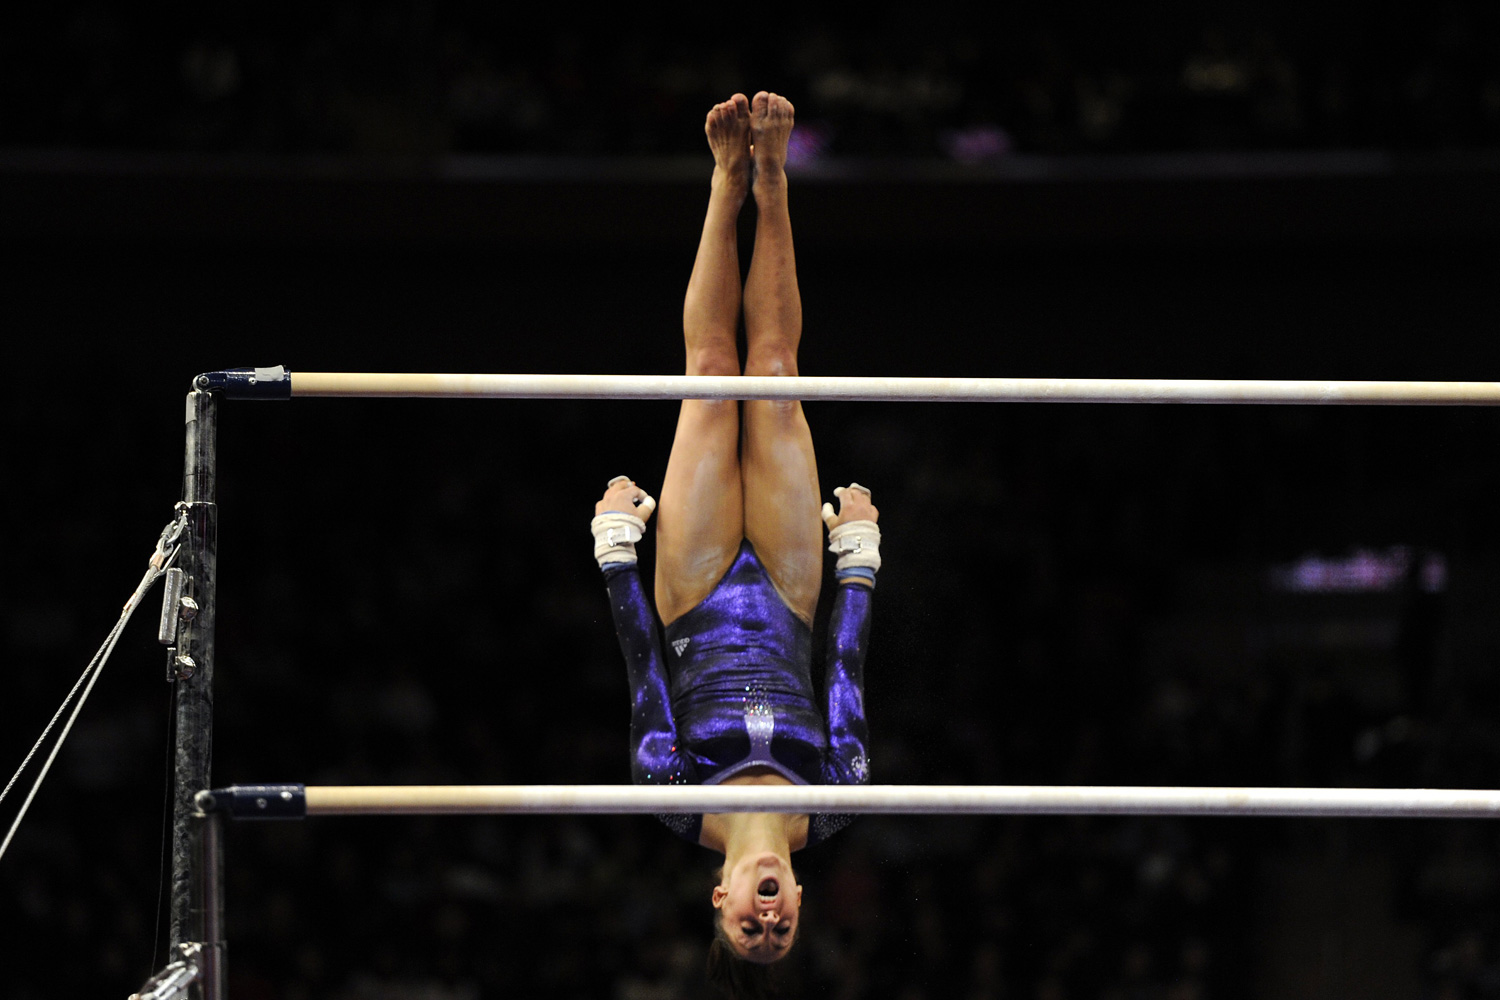 March 3, 2012. Jordyn Wieber of the U.S. performs on the uneven bars during the 2012 AT&amp;T American Cup at Madison Square Garden in New York City.